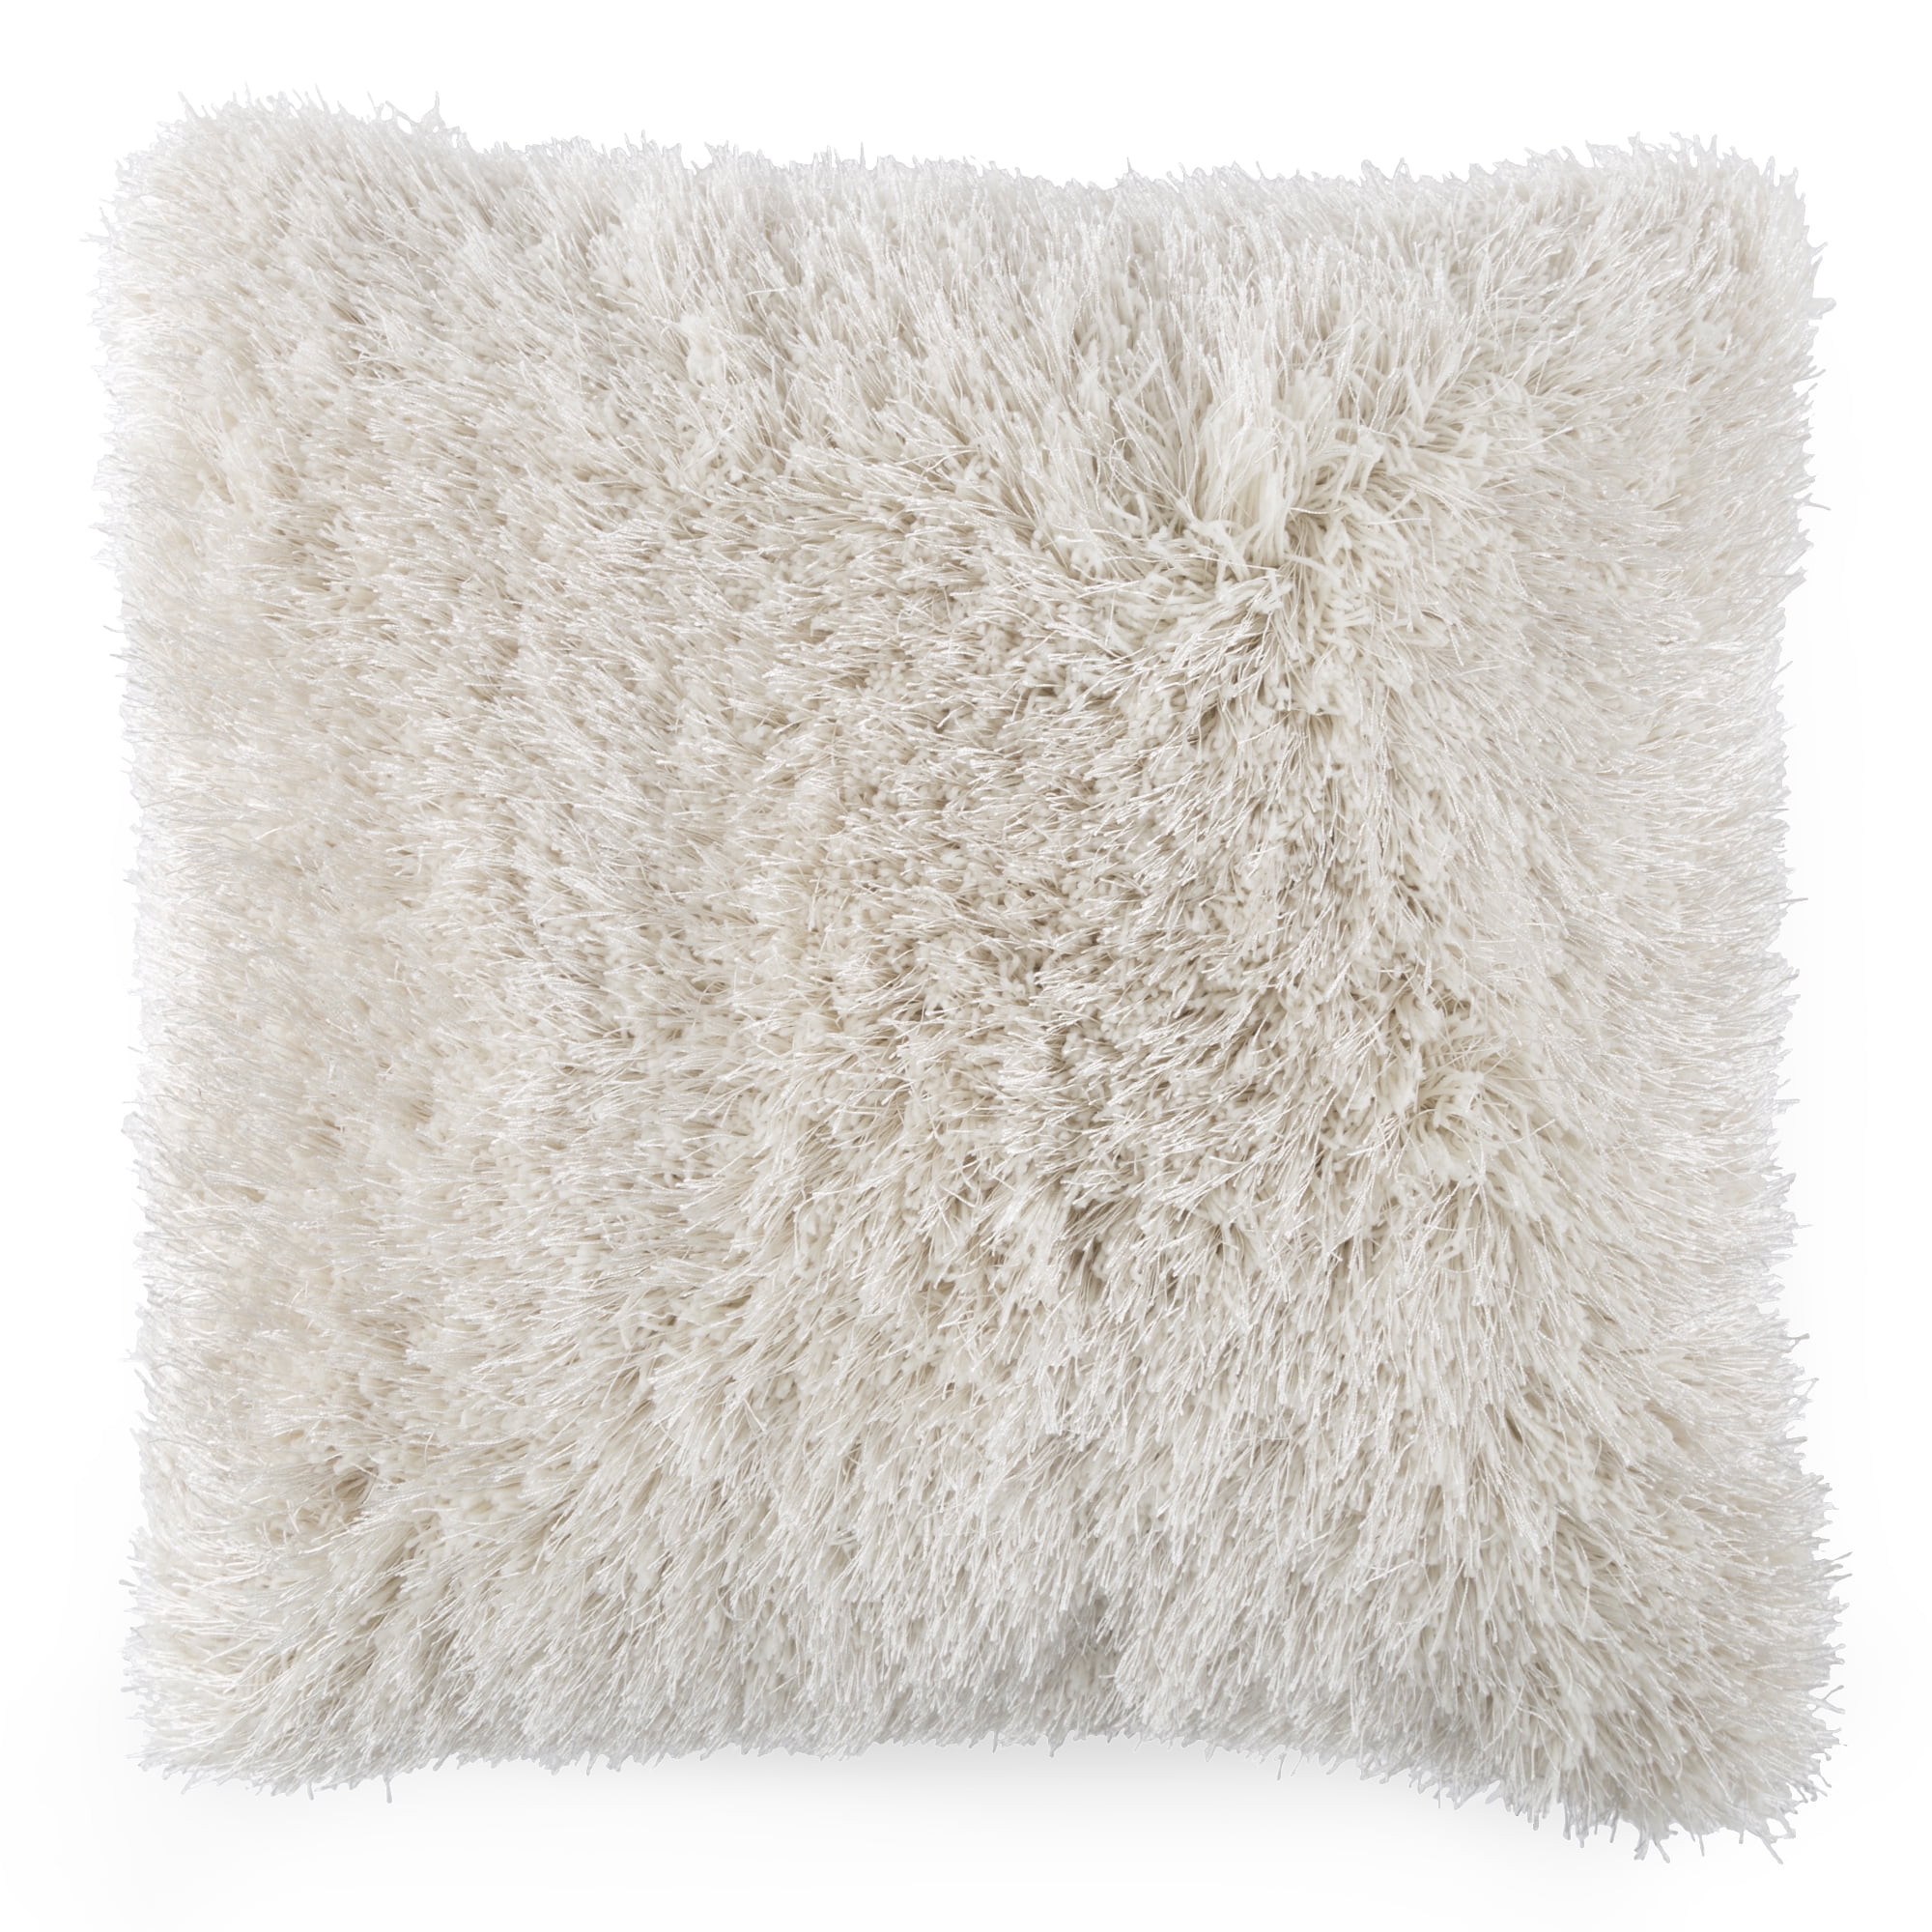 Fuzzy Oversized Throw Pillow - Shag Faux Fur Glam Decor - Plush Square  Accent Or Floor Pillow For Bedroom, Living Room, Or Dorm By Lavish Home  (beige) : Target